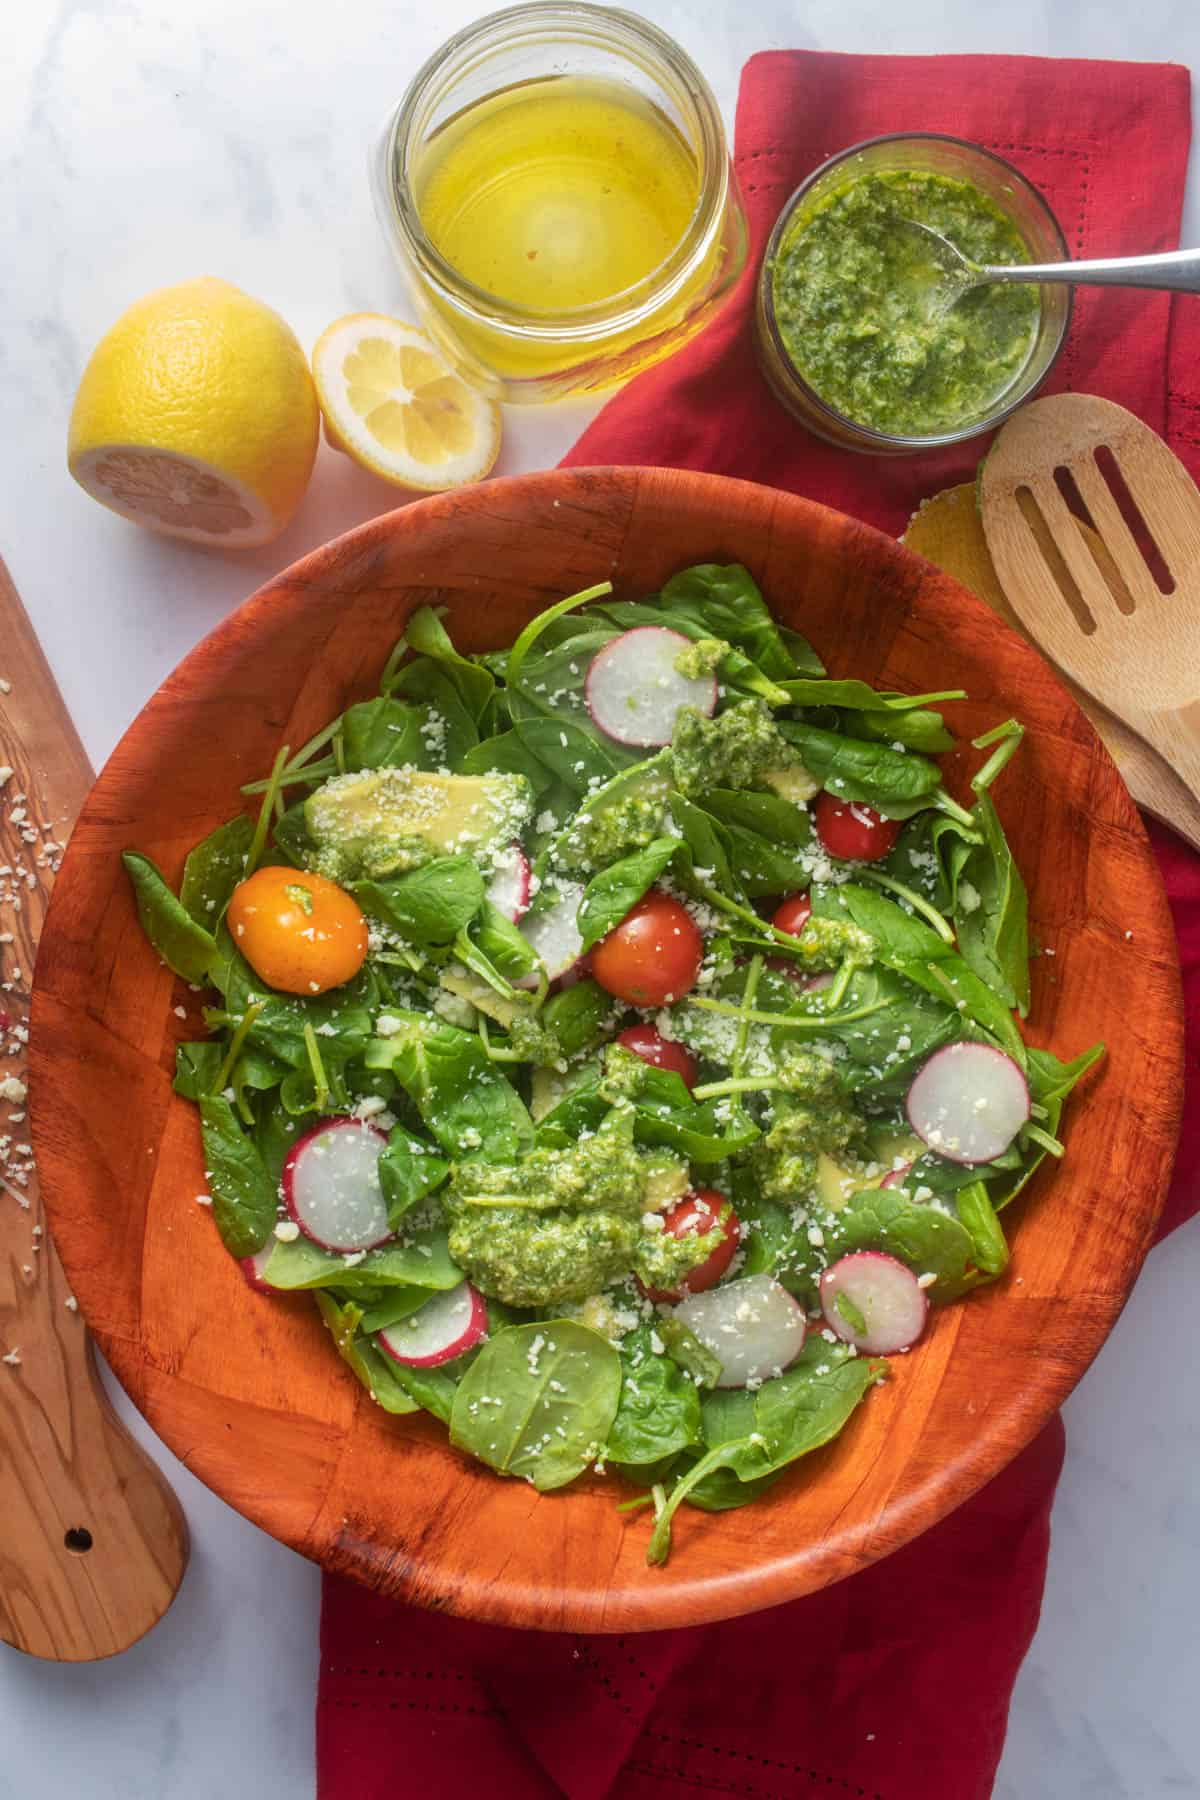 Bowl of spinach avocado salad with lemony vinaigrette on the side